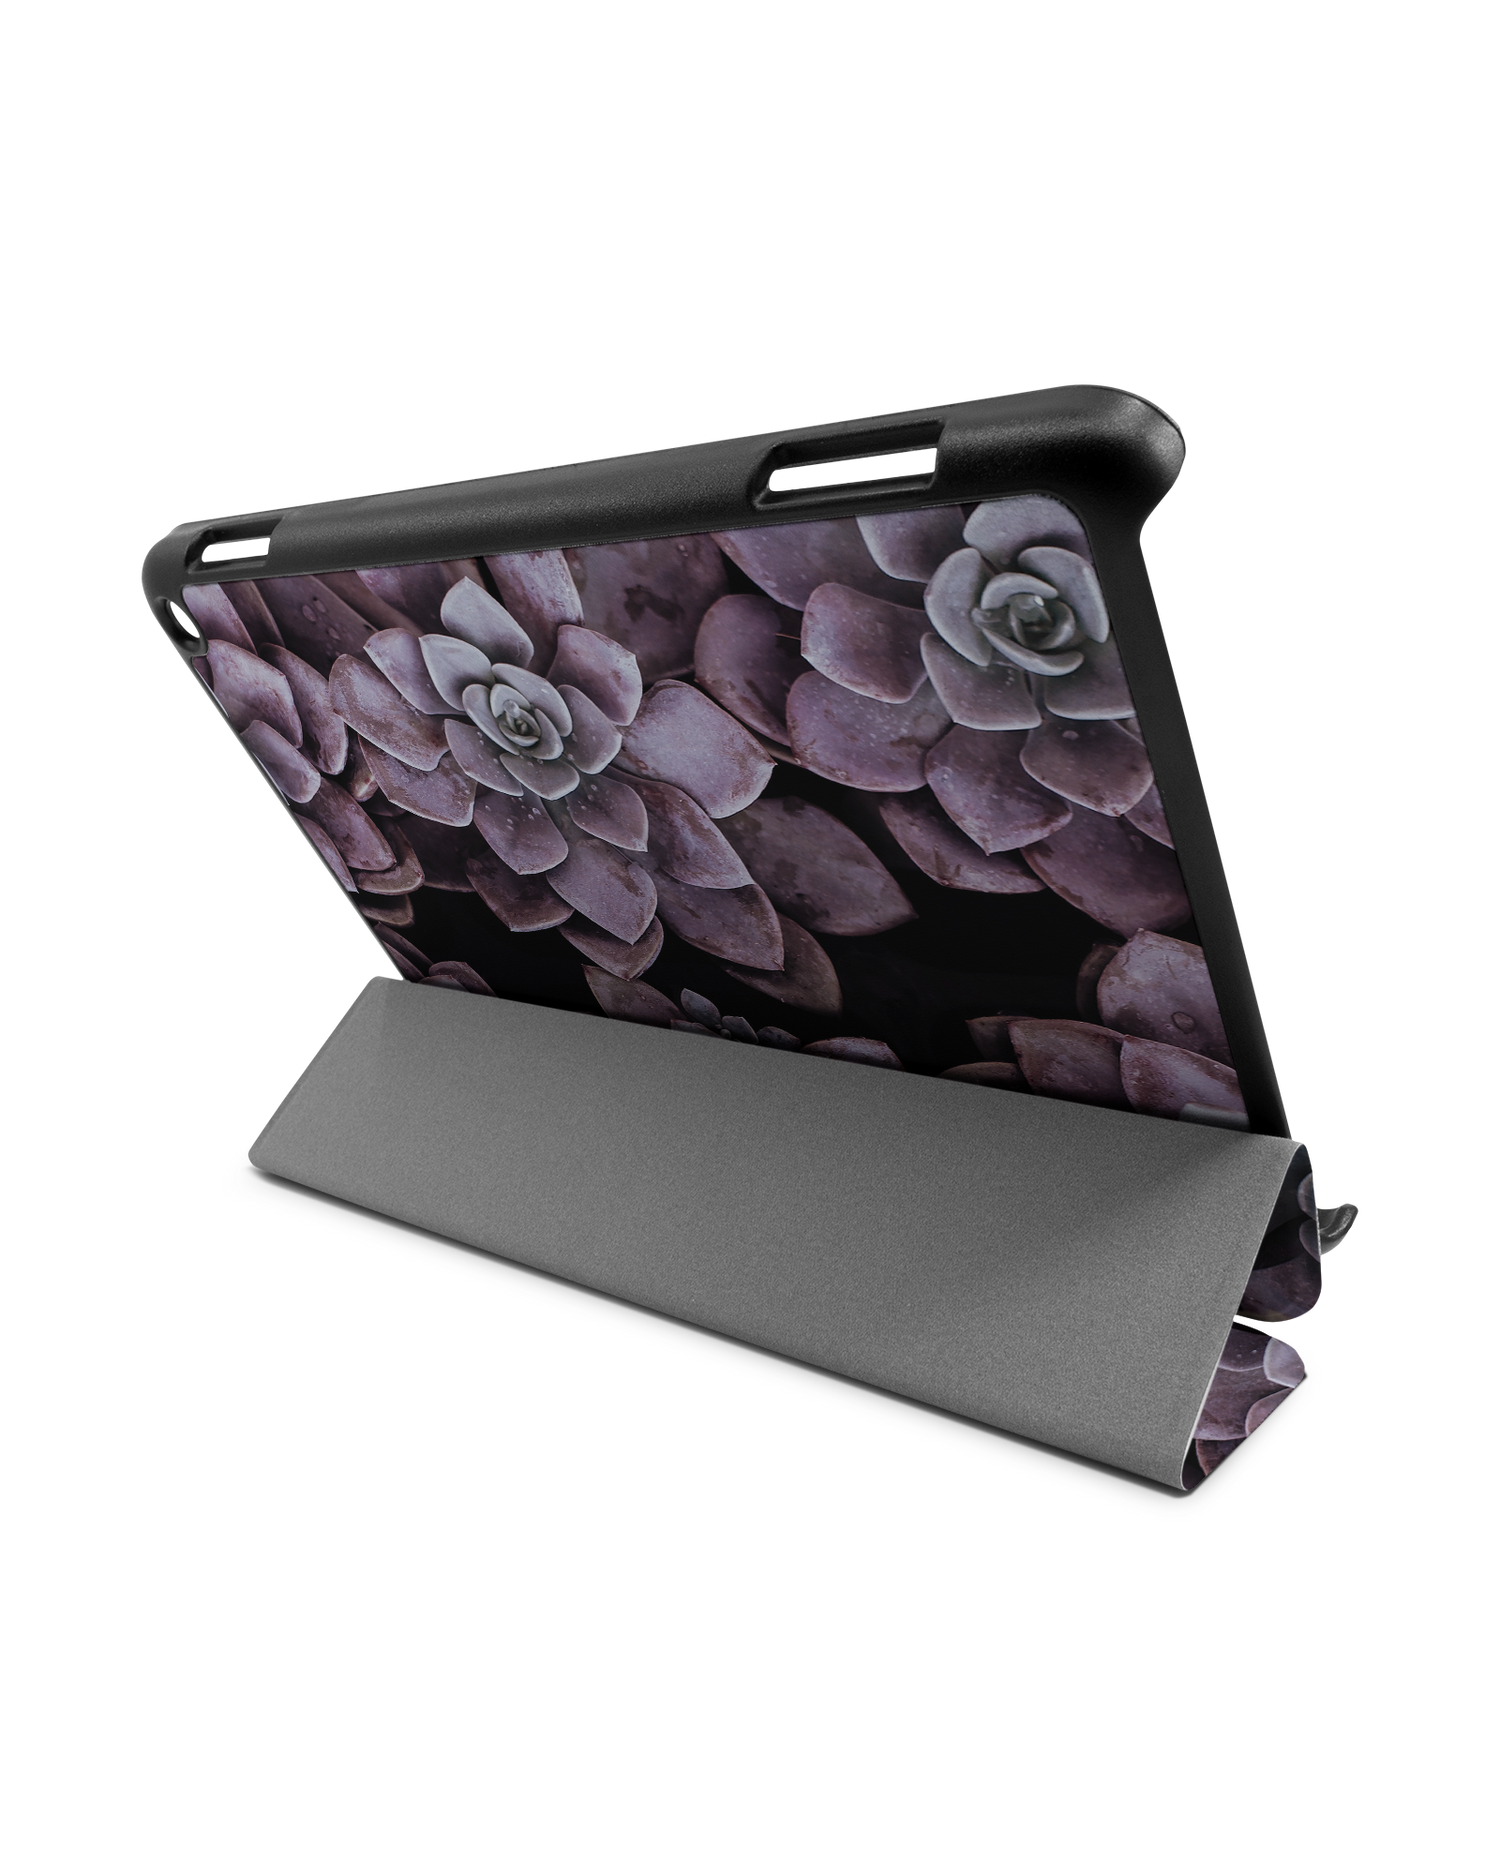 Purple Succulents Tablet Smart Case for Amazon Fire HD 8 (2022), Amazon Fire HD 8 Plus (2022), Amazon Fire HD 8 (2020), Amazon Fire HD 8 Plus (2020): Used as Stand